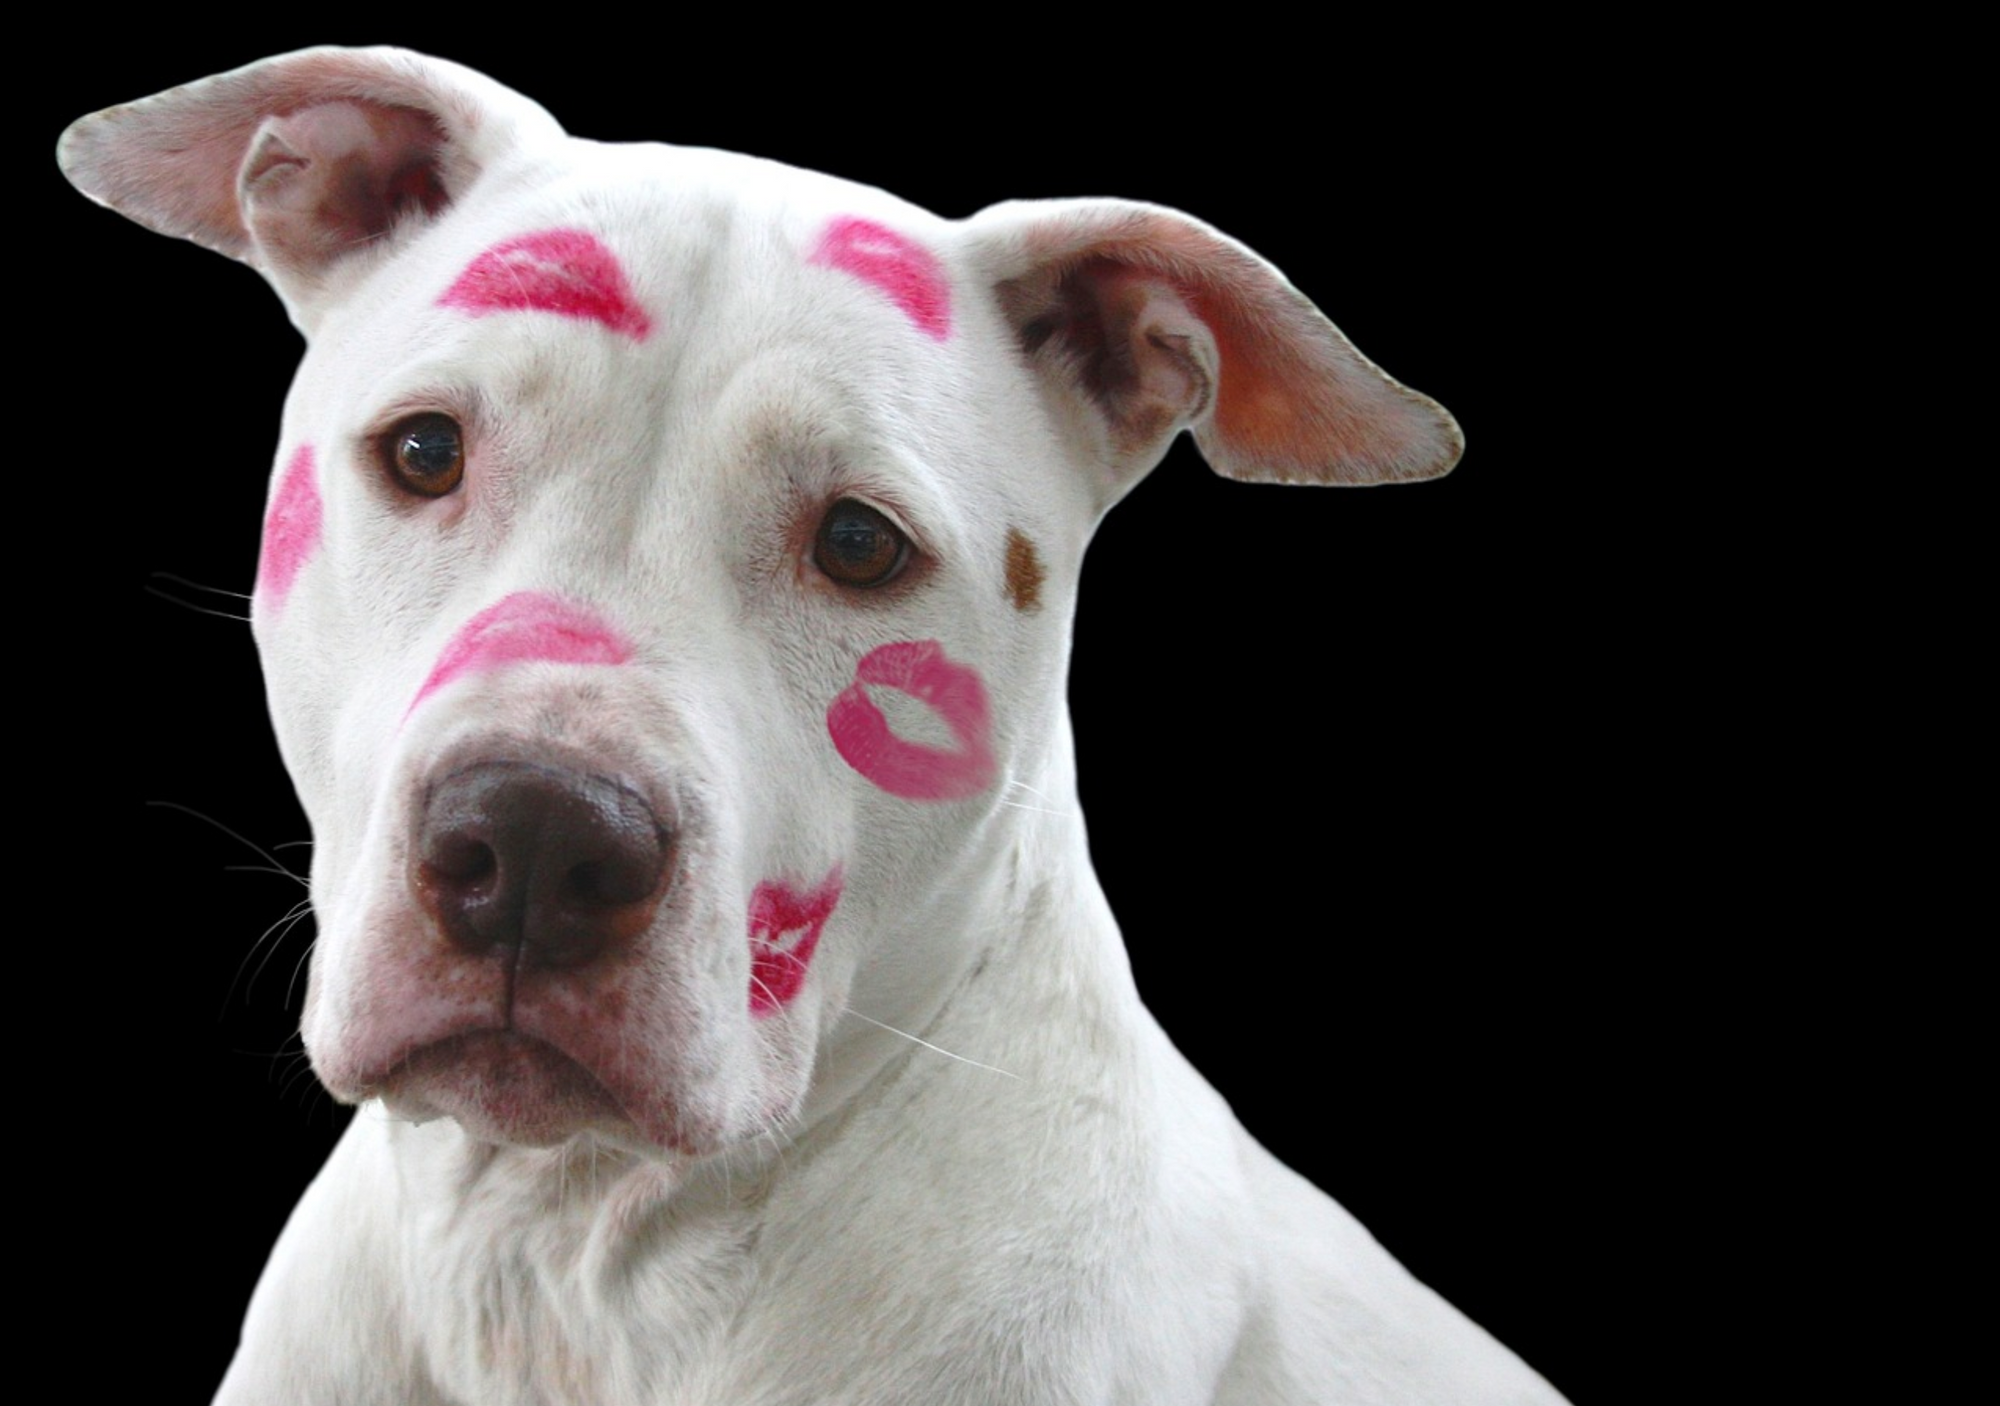 Rescue Dog Pit Bull with lipstick kisses all over his face